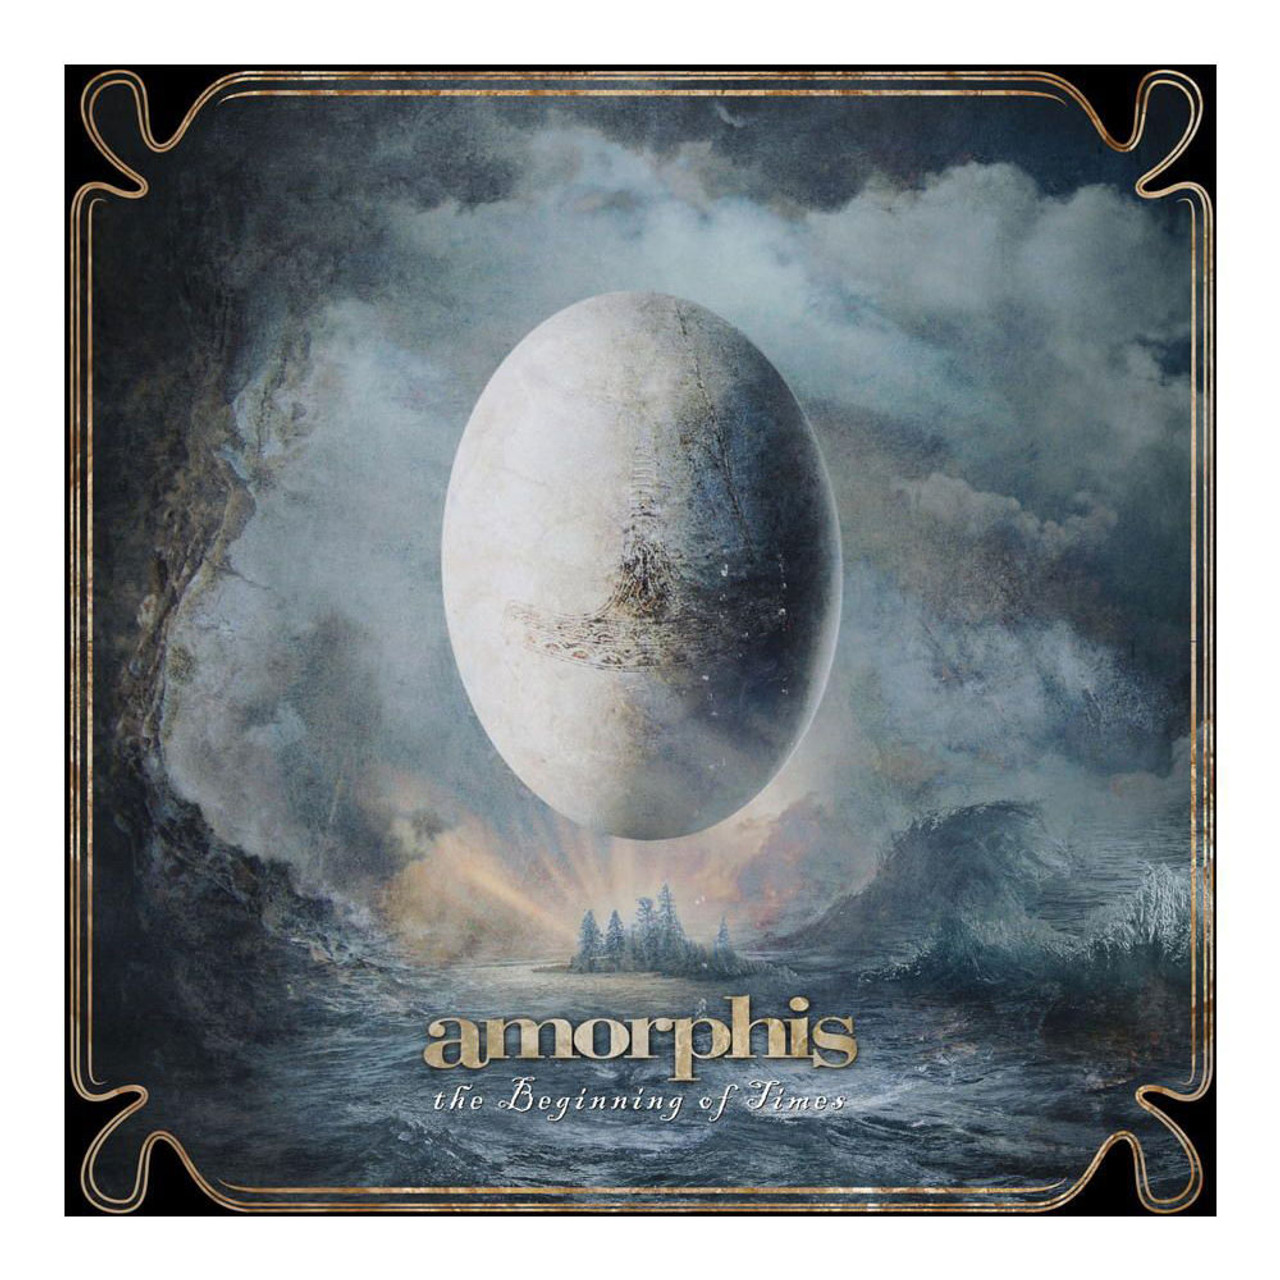 Amorphis 'The Beginning of Times' CD